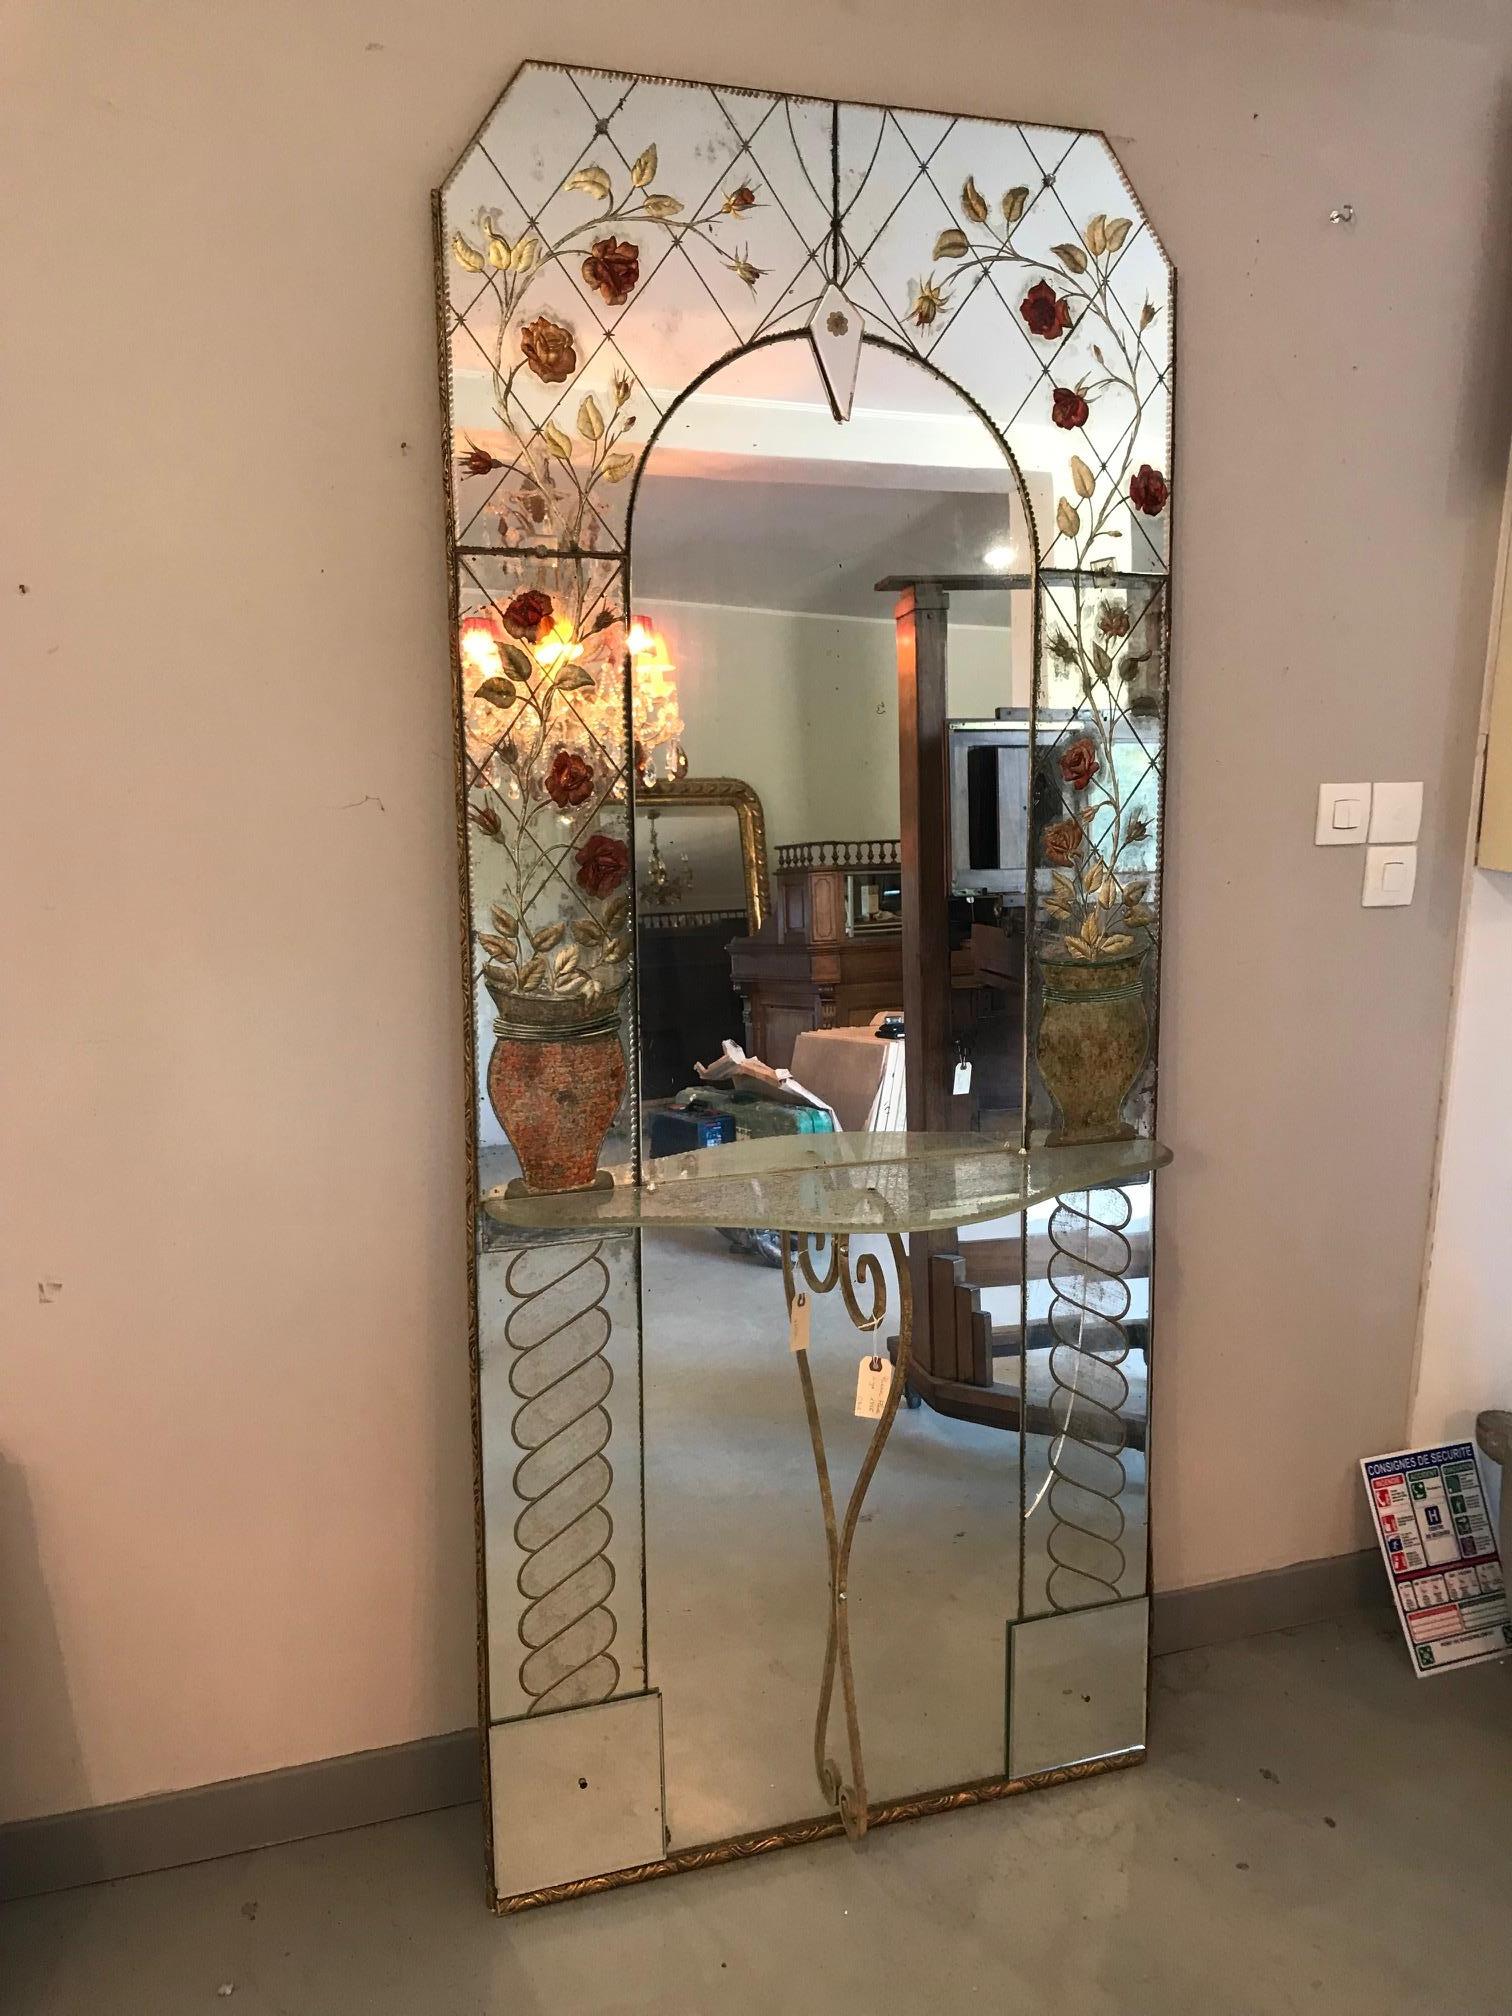 Beautiful 20th century Venetian signed by Villeponge floor mirror from the 1956s.
Roses glass decoration. Glass shelf with white iron base.
Very delicate mirror glass. Rare mirror. Hand lettered signature 